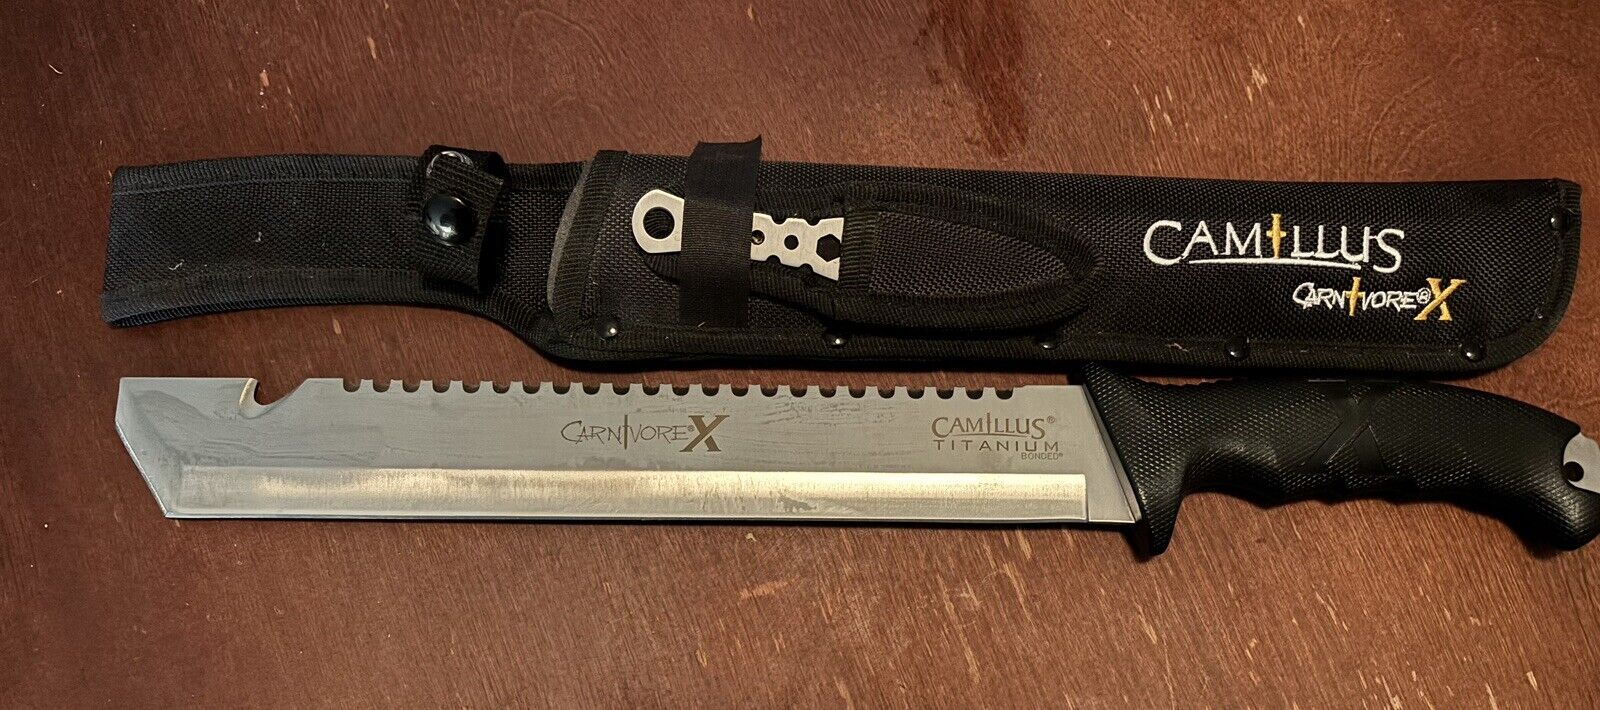 Camillus Carnivore X 18-Inch Machete with Sheath and Multitool Knife